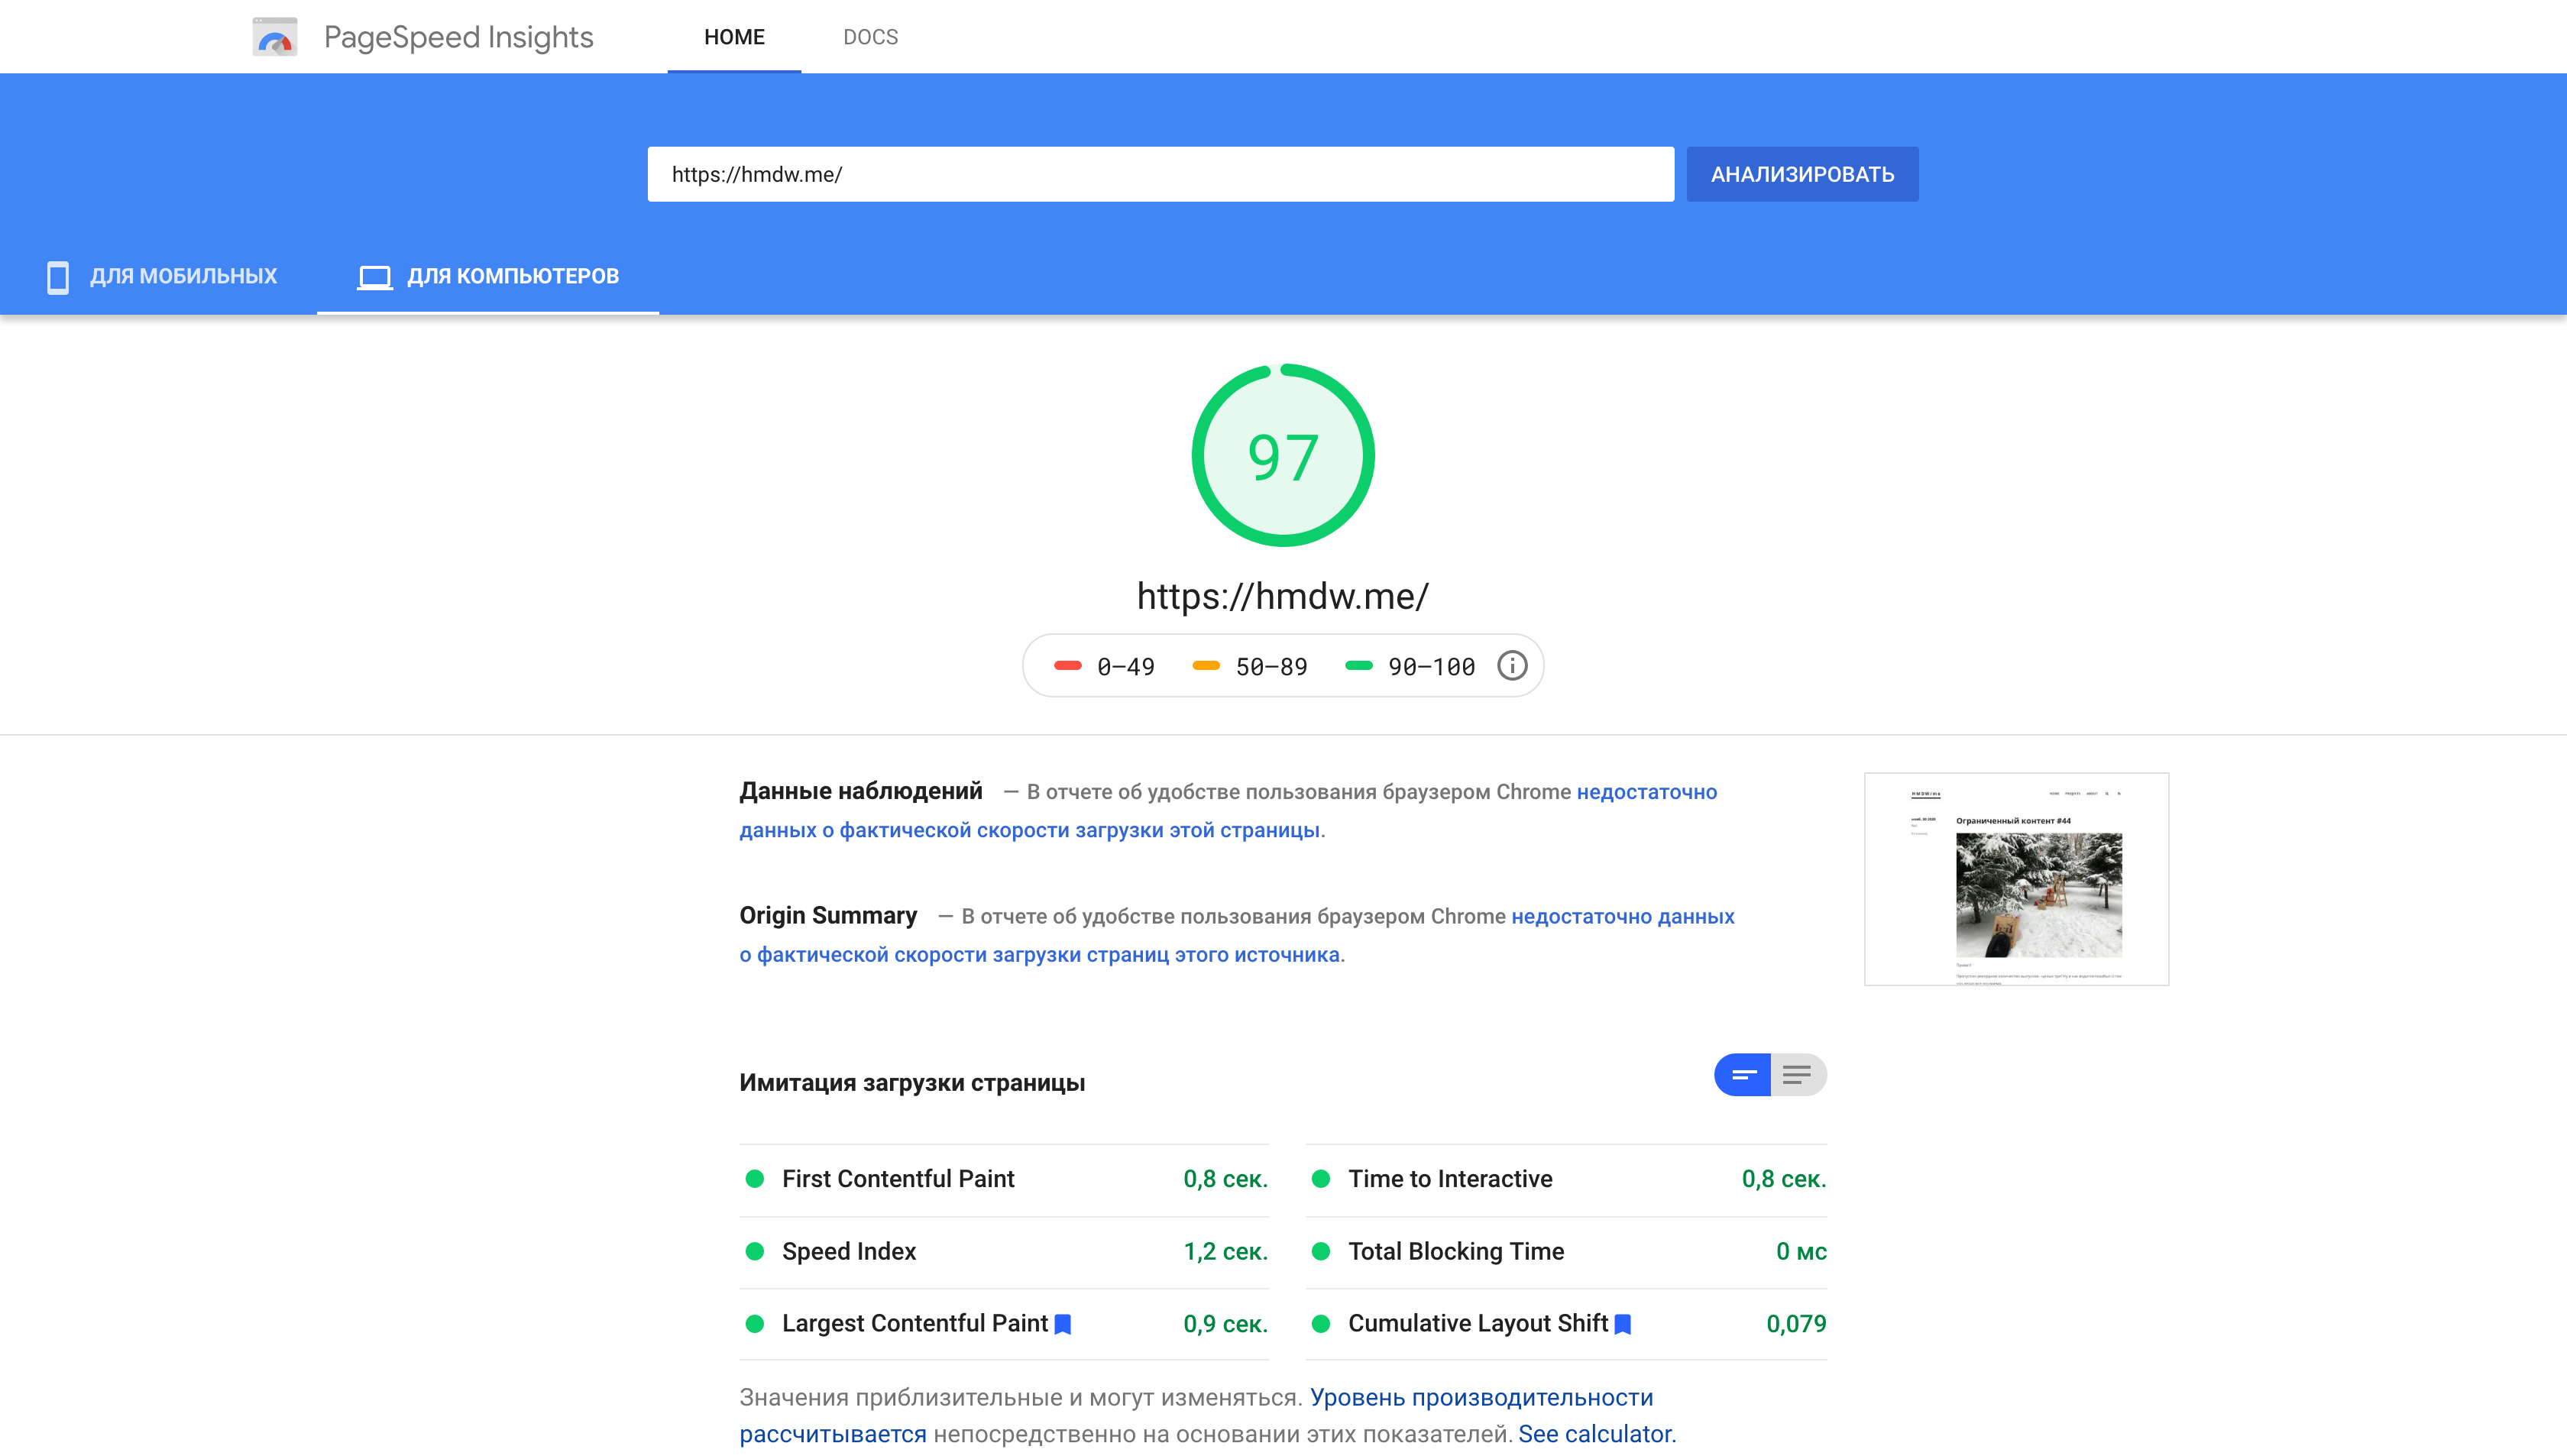 Pagespeed Insights results for desktop, after